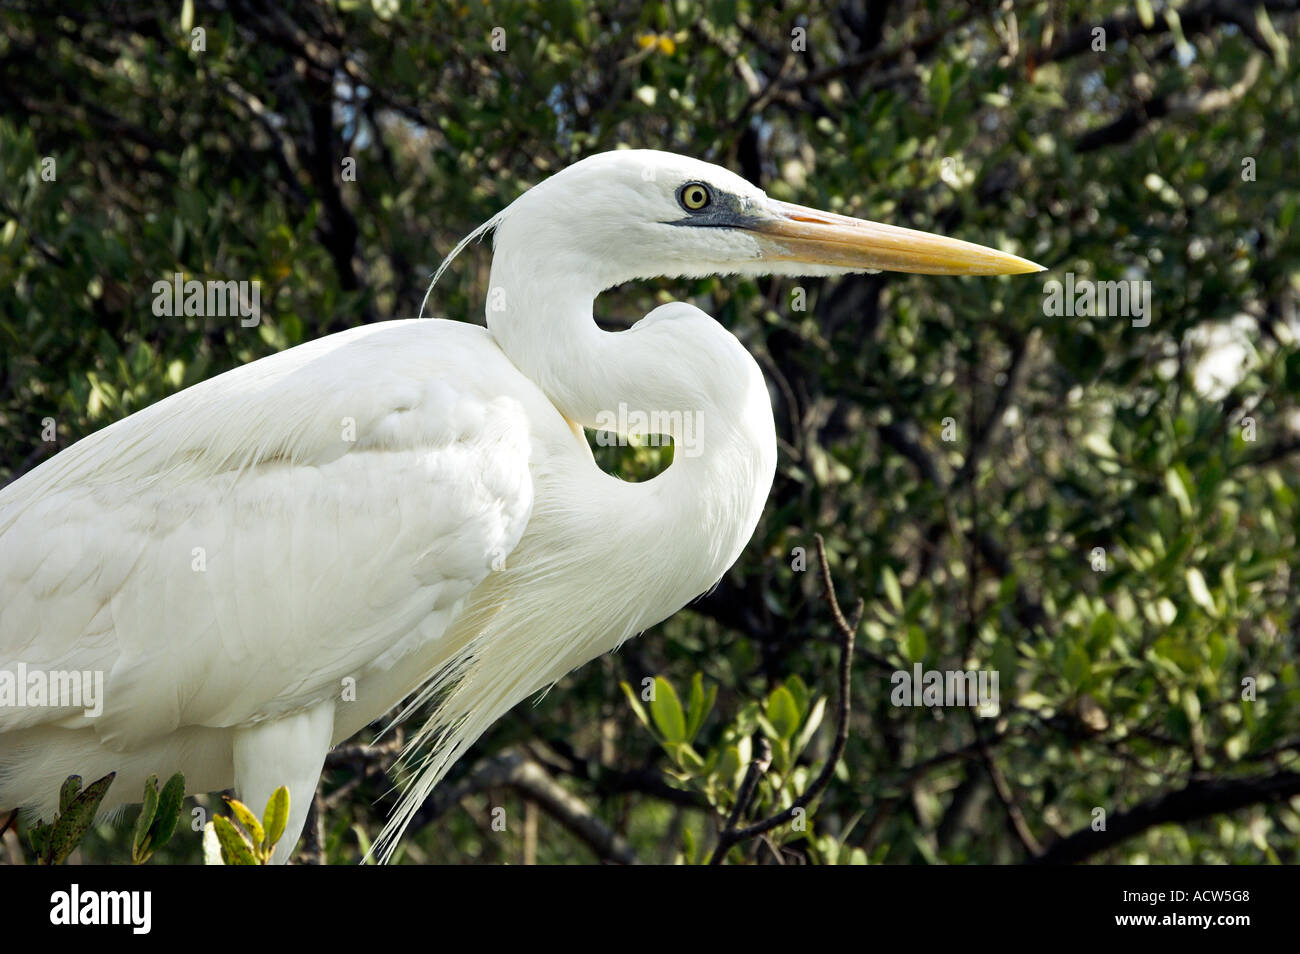 A Great White Egret in breeding plumage portrait at the Wild Bird Sanctuary in the Florida Keys USA Stock Photo